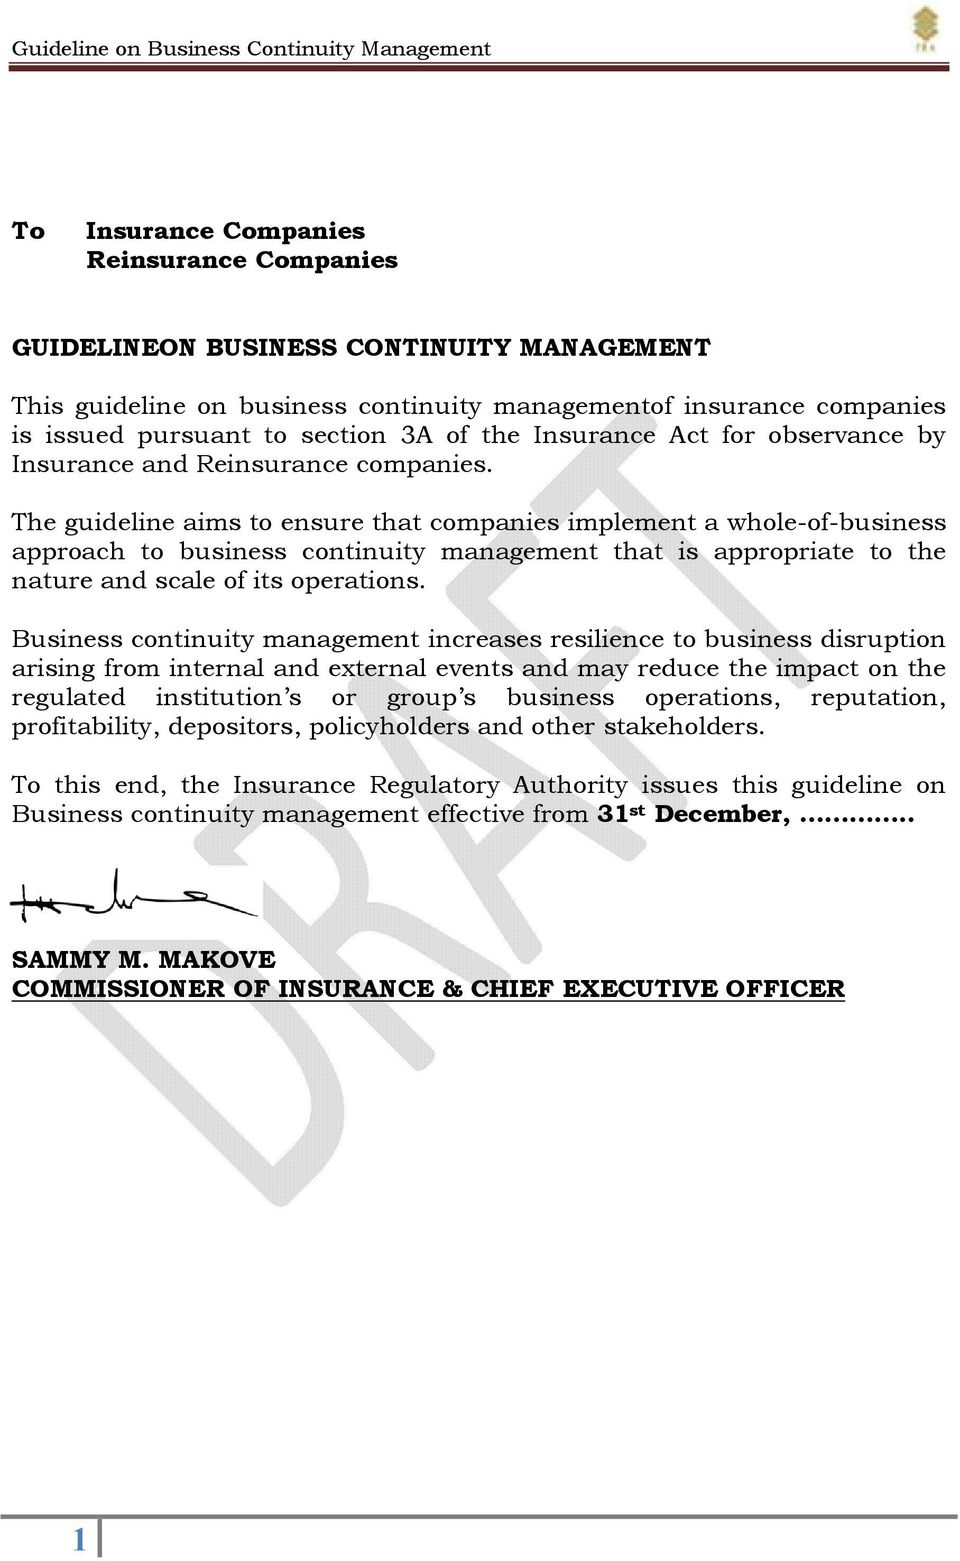 The guideline aims to ensure that companies implement a whole-of-business approach to business continuity management that is appropriate to the nature and scale of its operations.